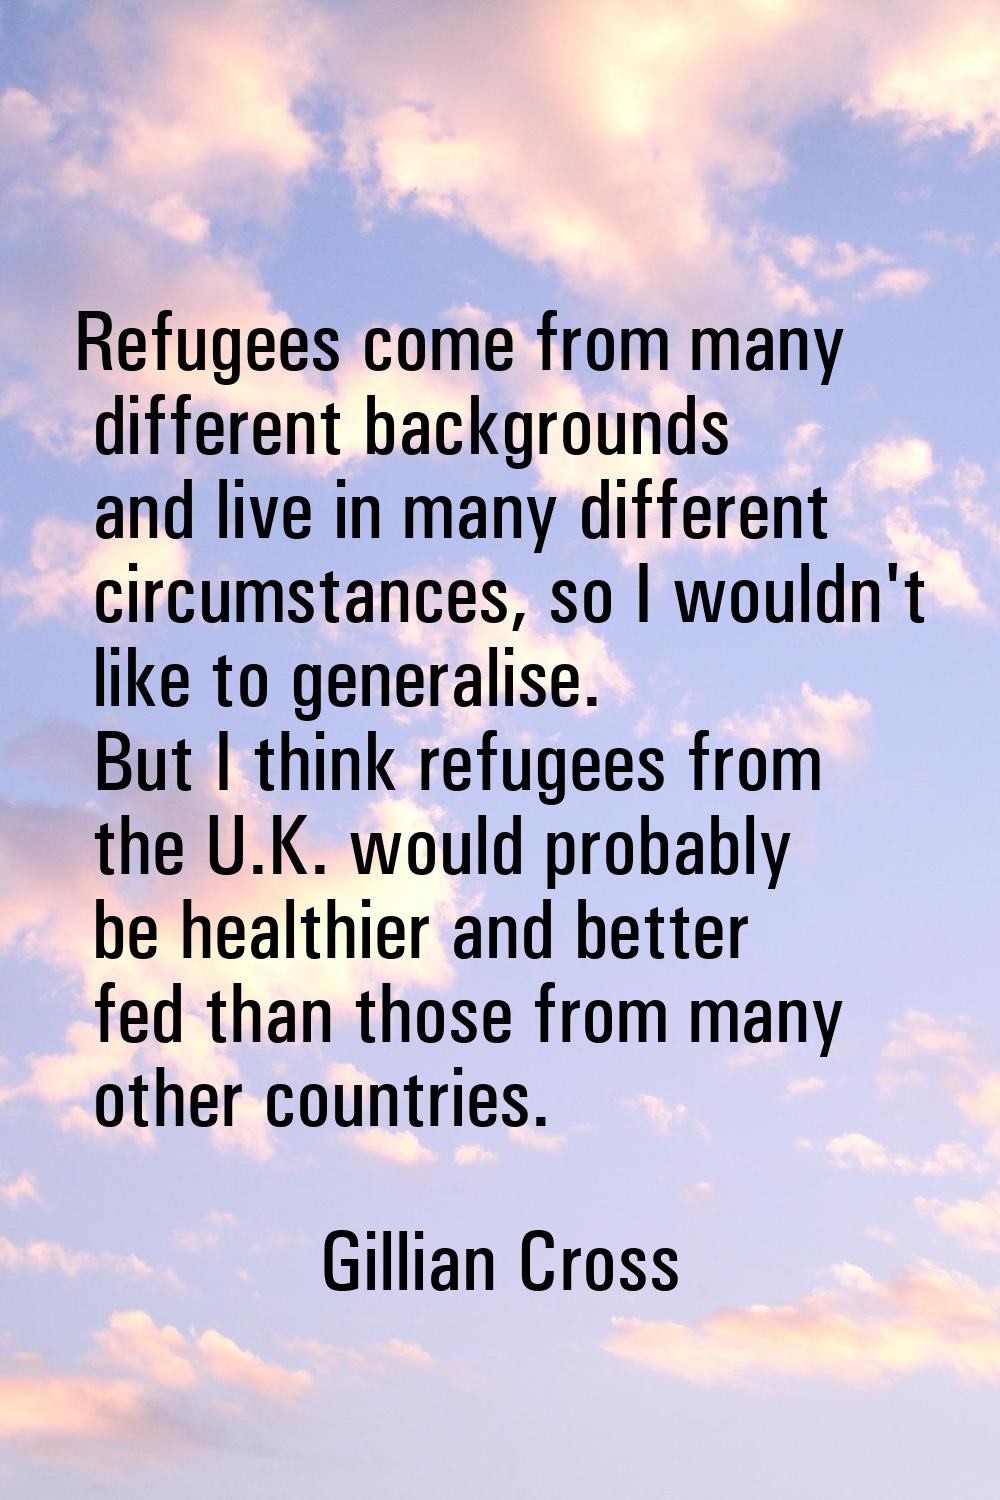 Refugees come from many different backgrounds and live in many different circumstances, so I wouldn